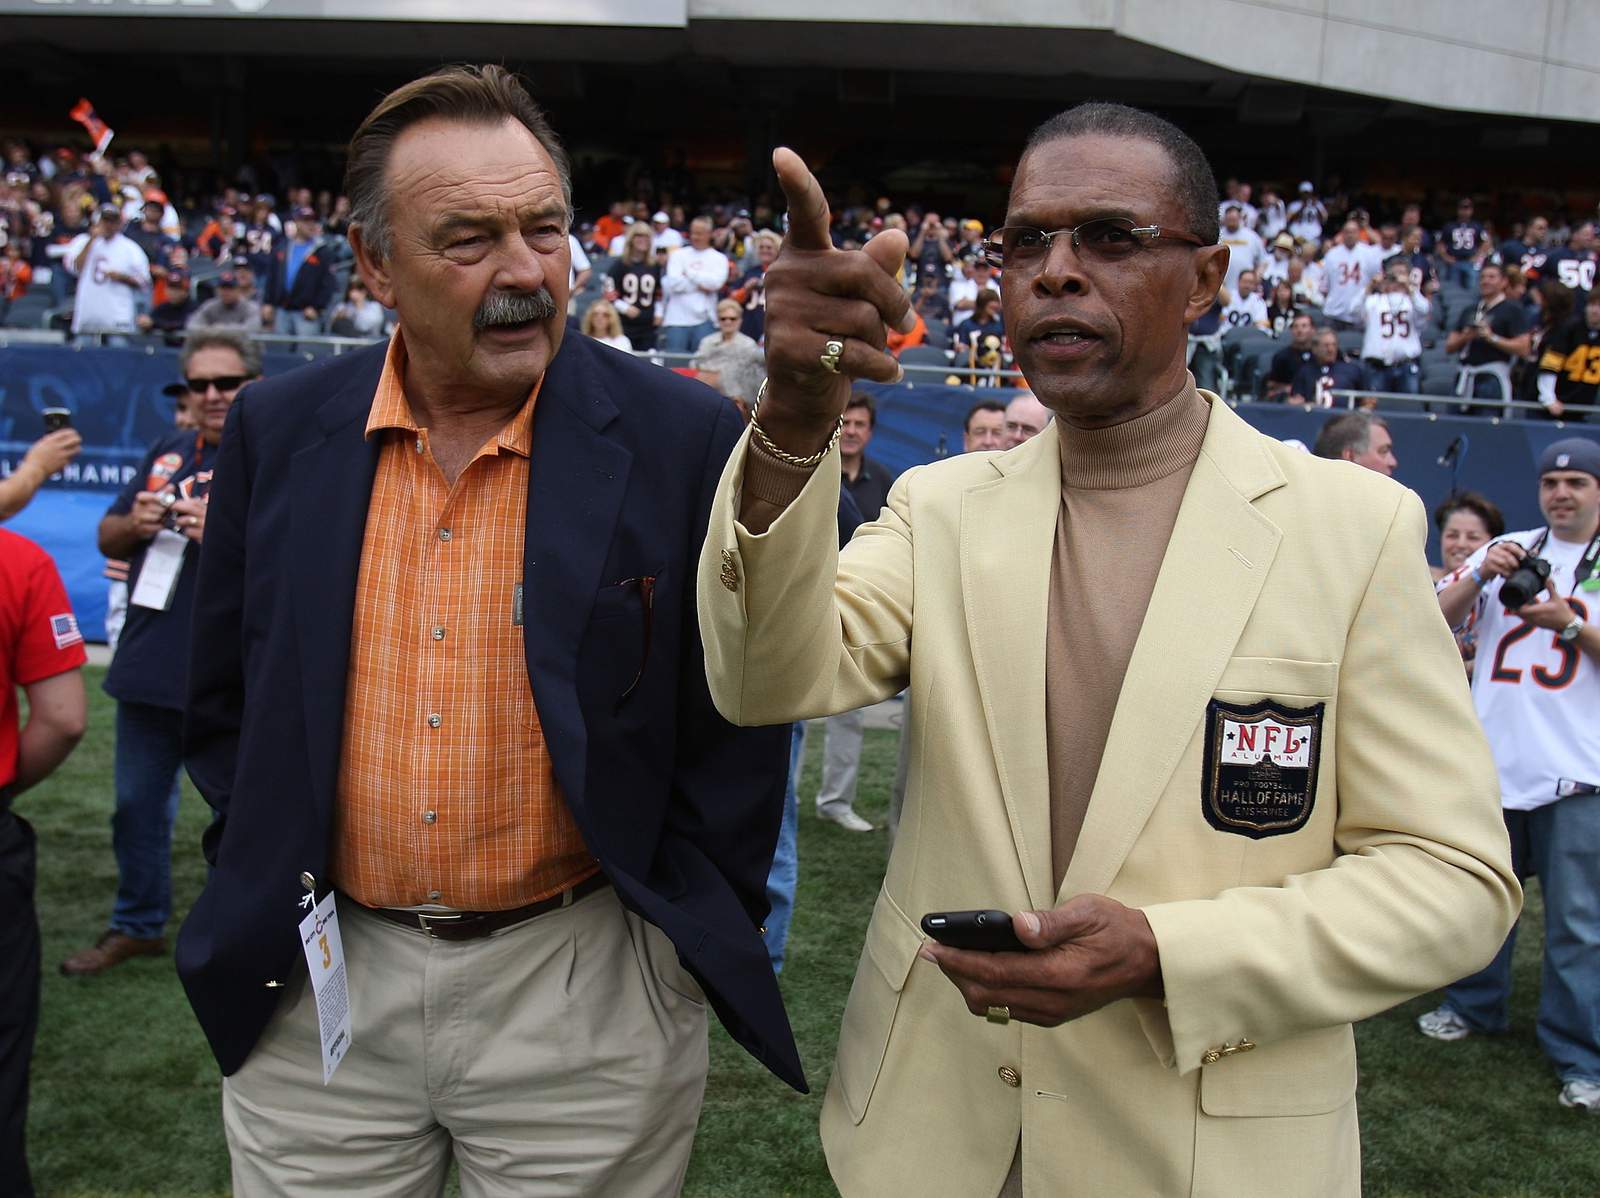 Gale Sayers, Bears Hall of Fame running back, dies at 77